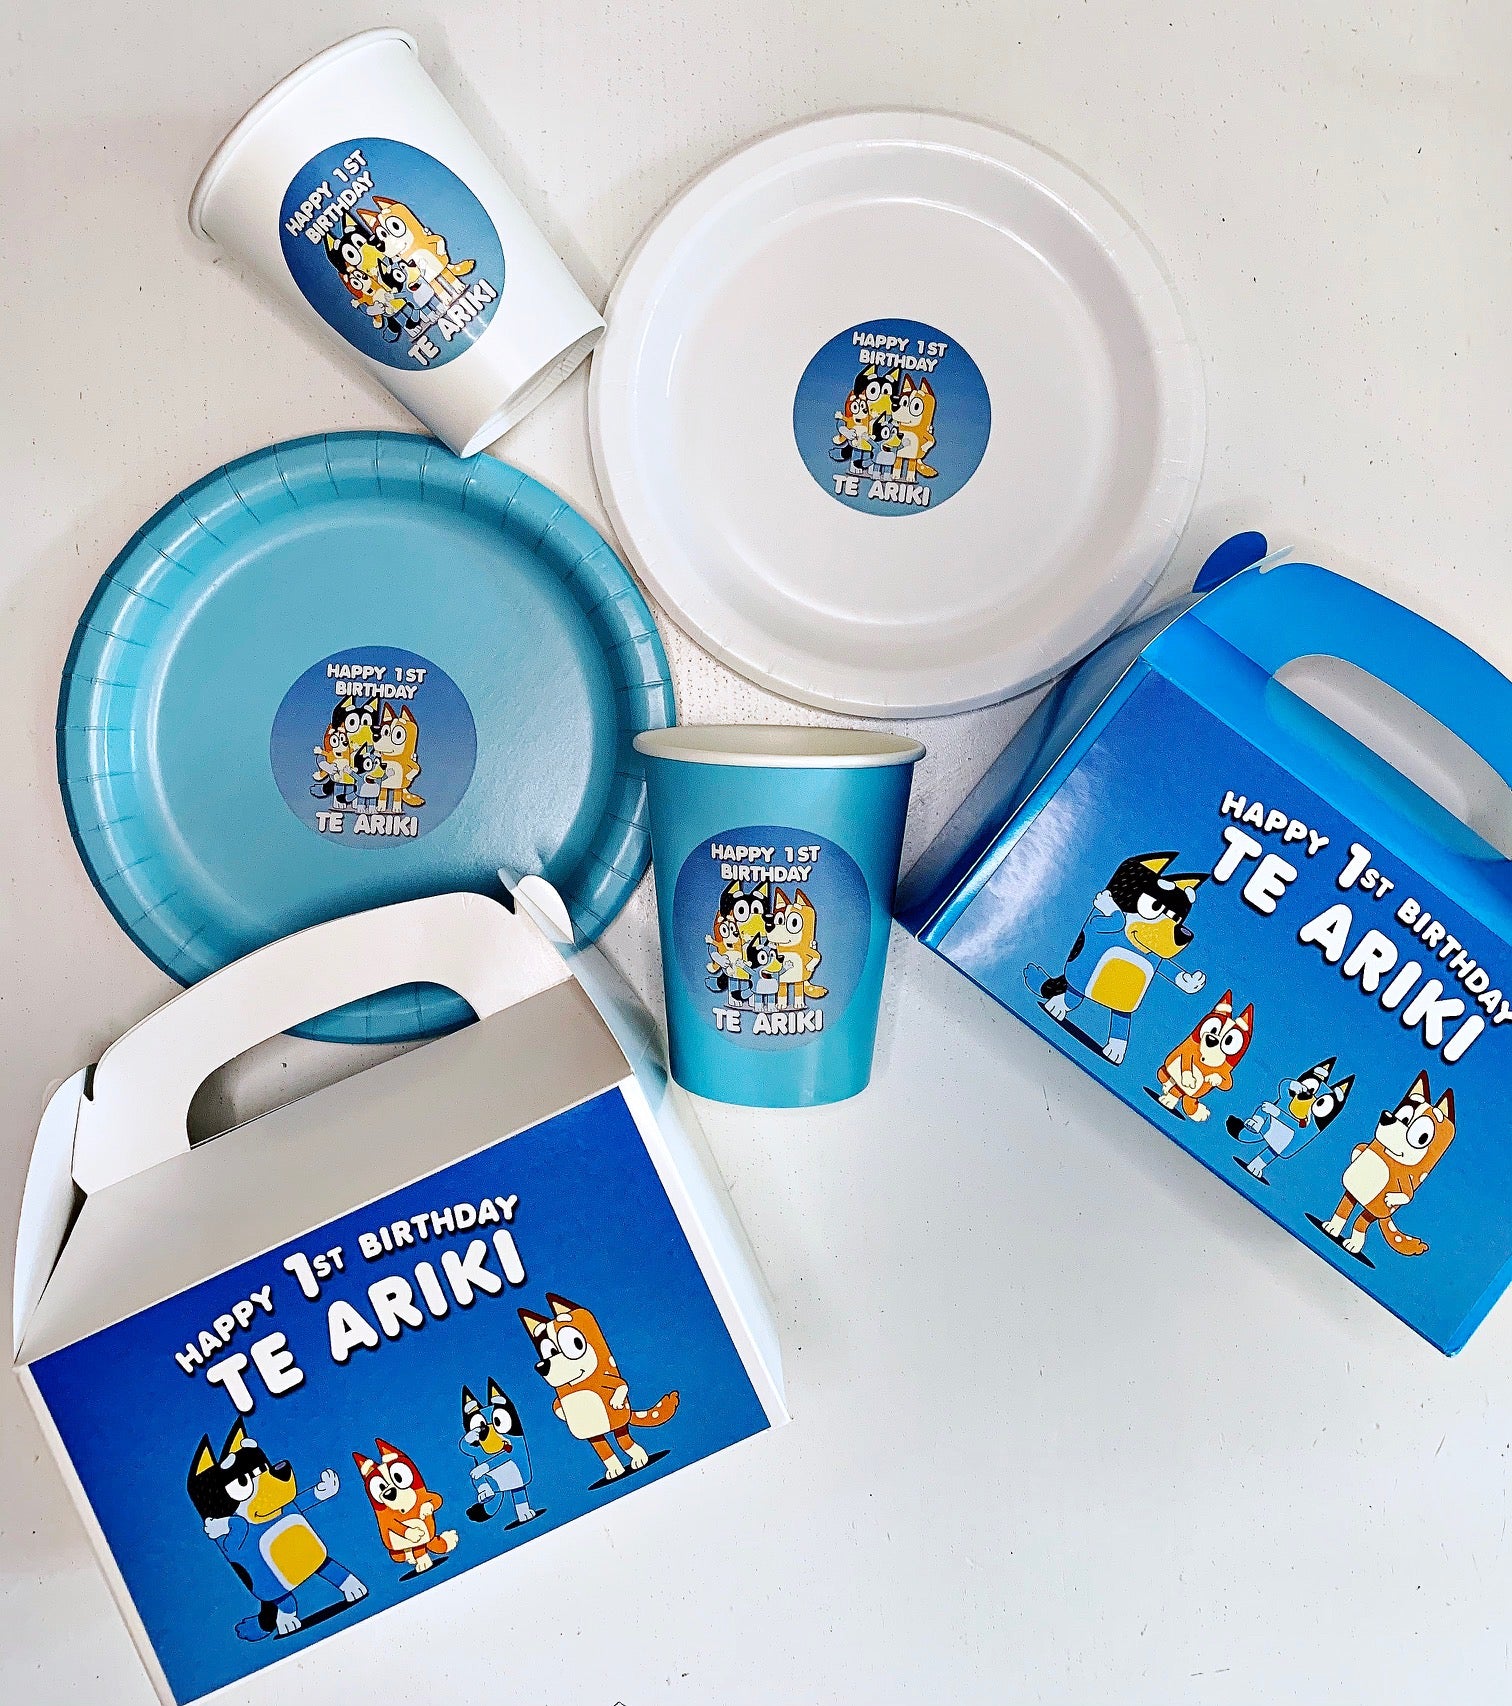 Buy Bluey Party Supplies in NZ Online - My Party Box – Tagged Blue–